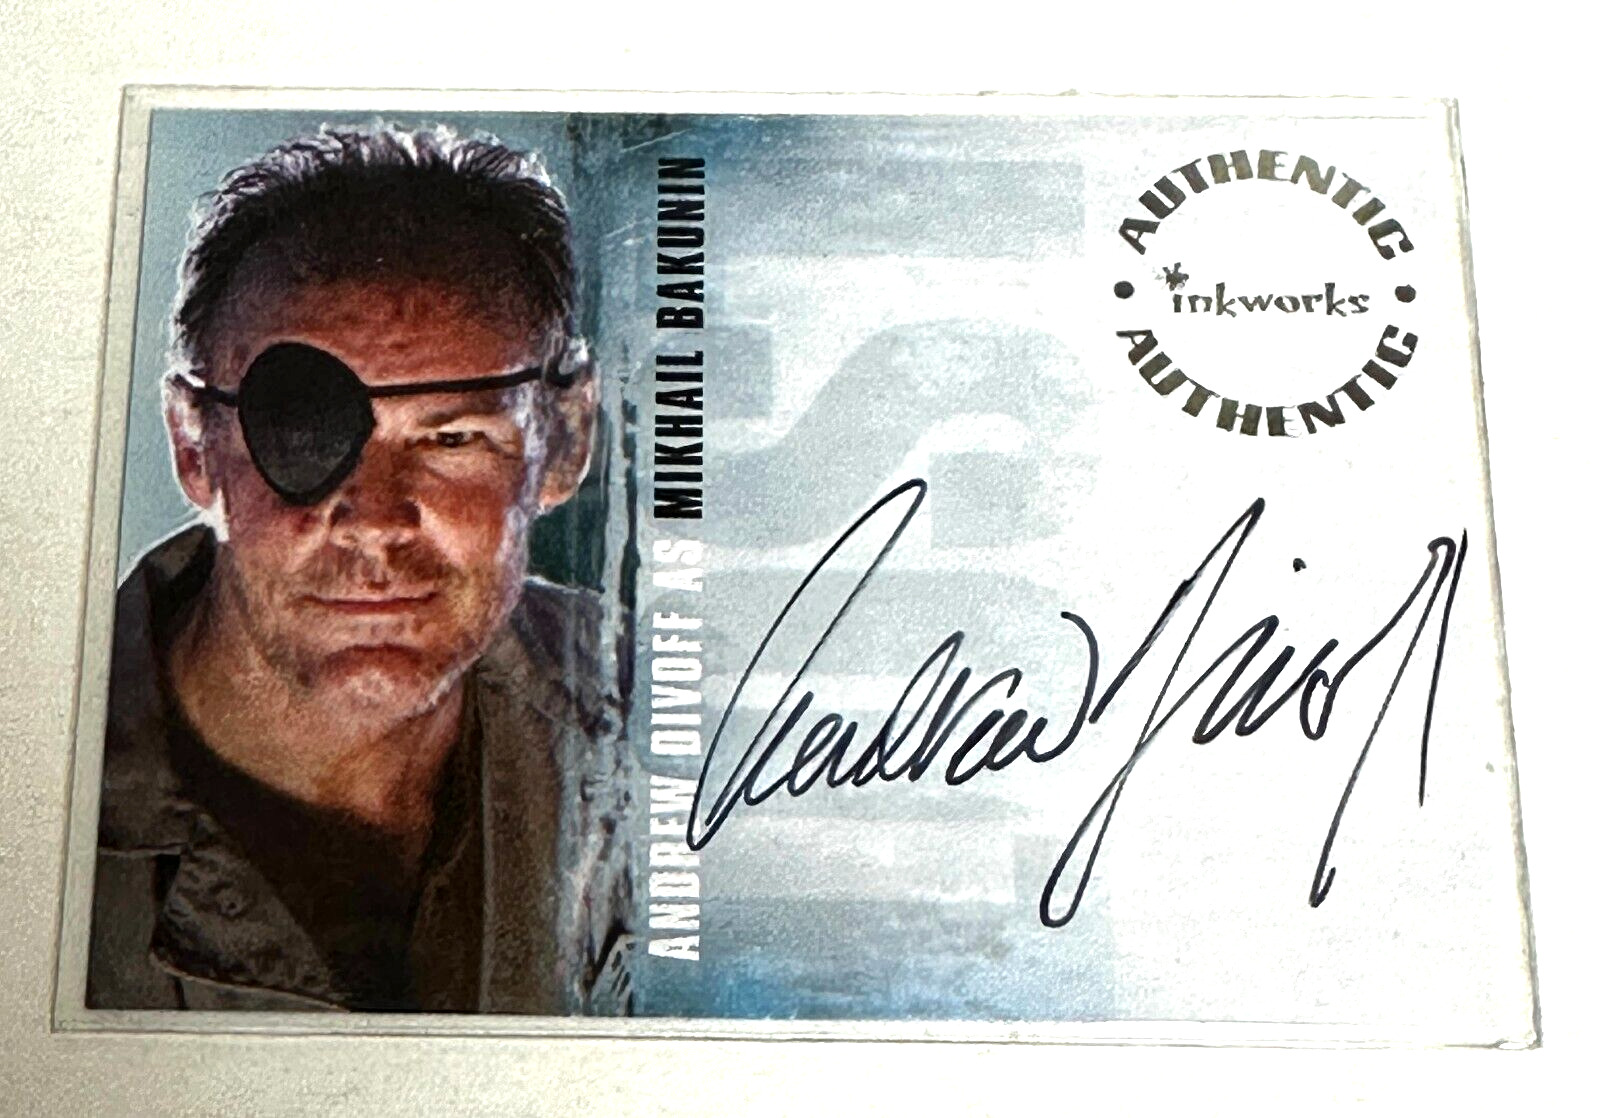 2006 Lost Season 3 Autograph Card Signed by Andrew Divoff (Mikhail Bakunin) A-34